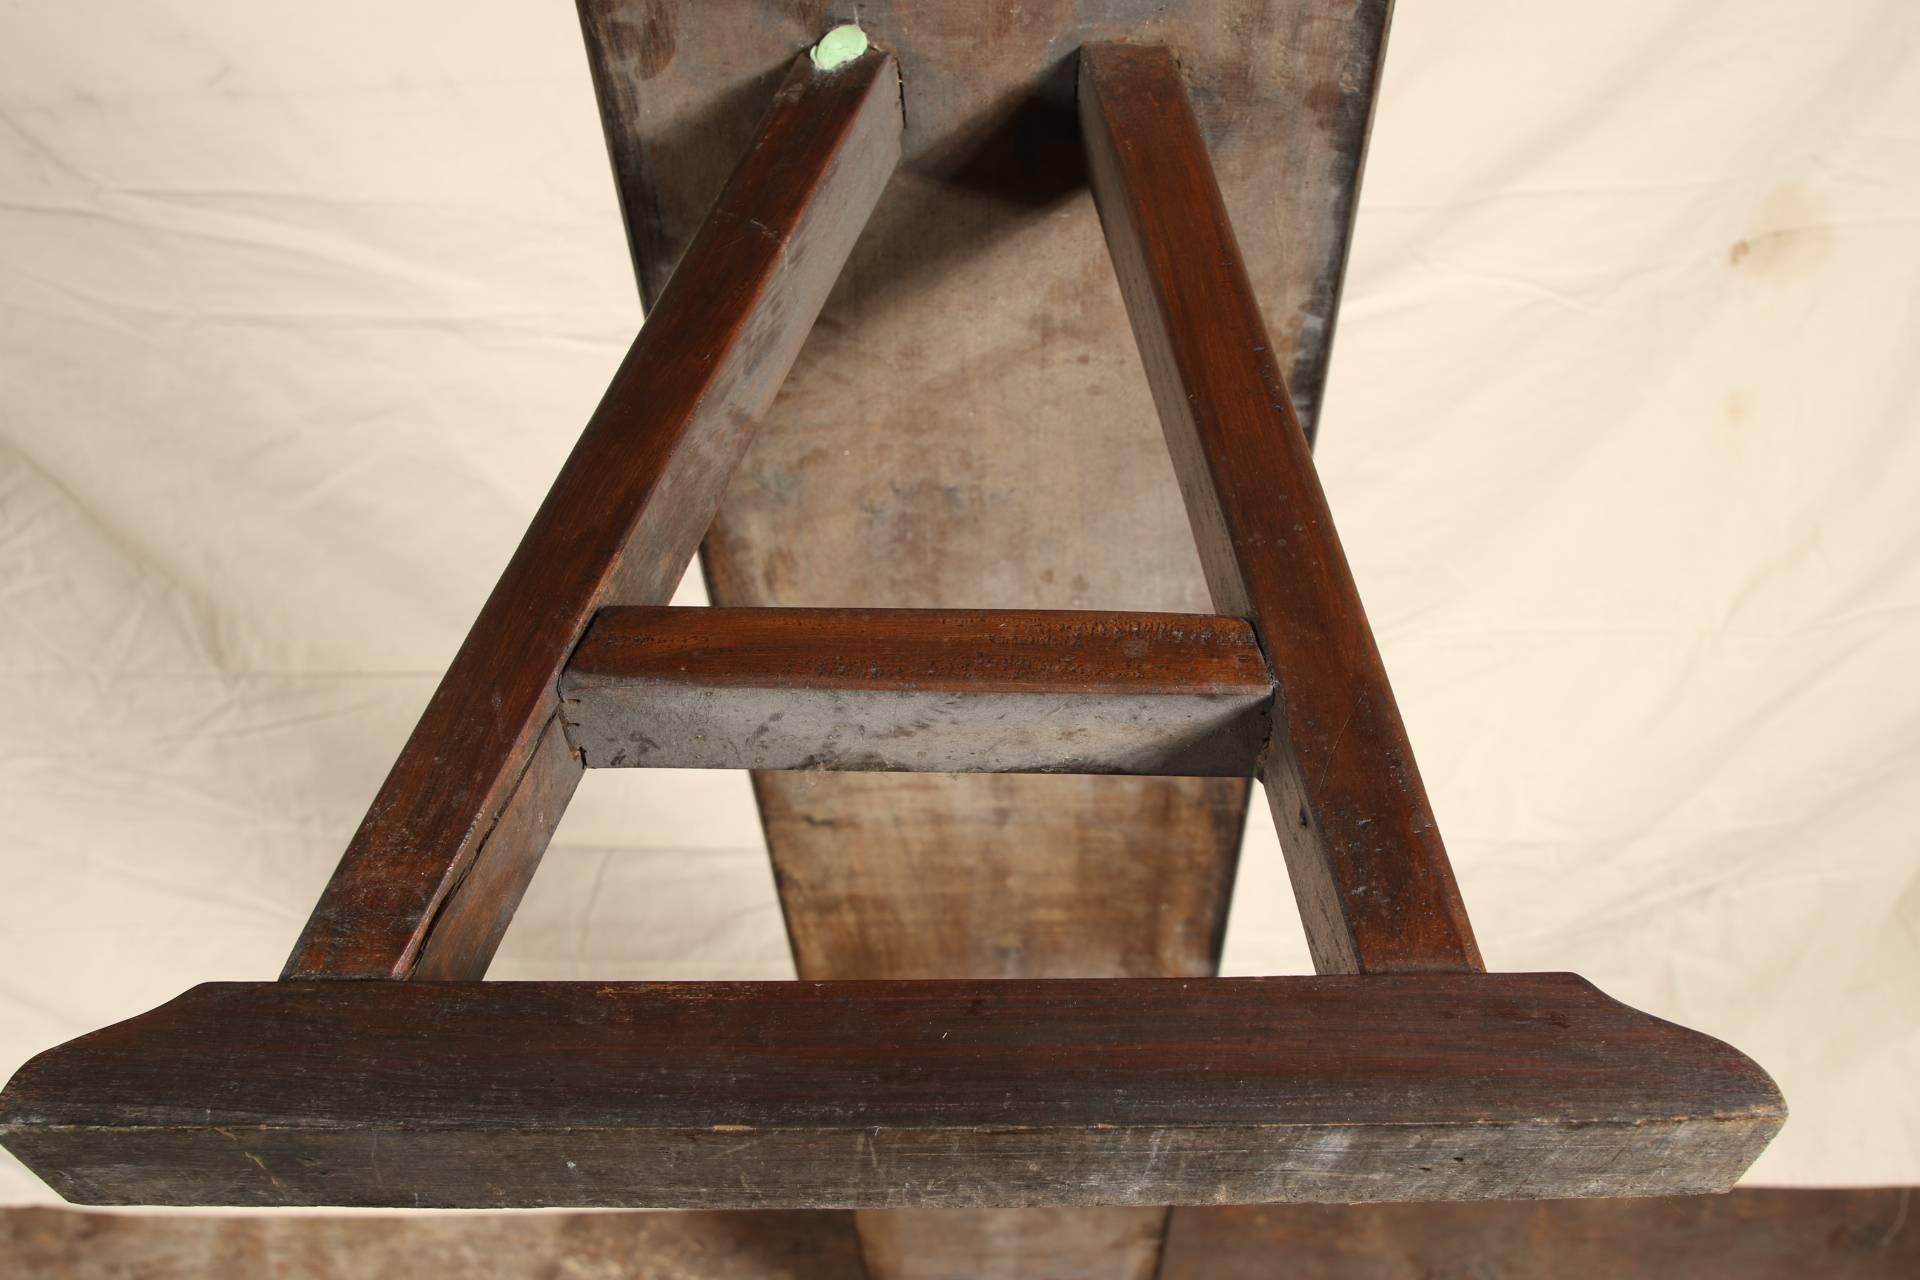 Heavy Chinese carved hardwood vintage bench having triangular supports and peg construction.
Condition: good.